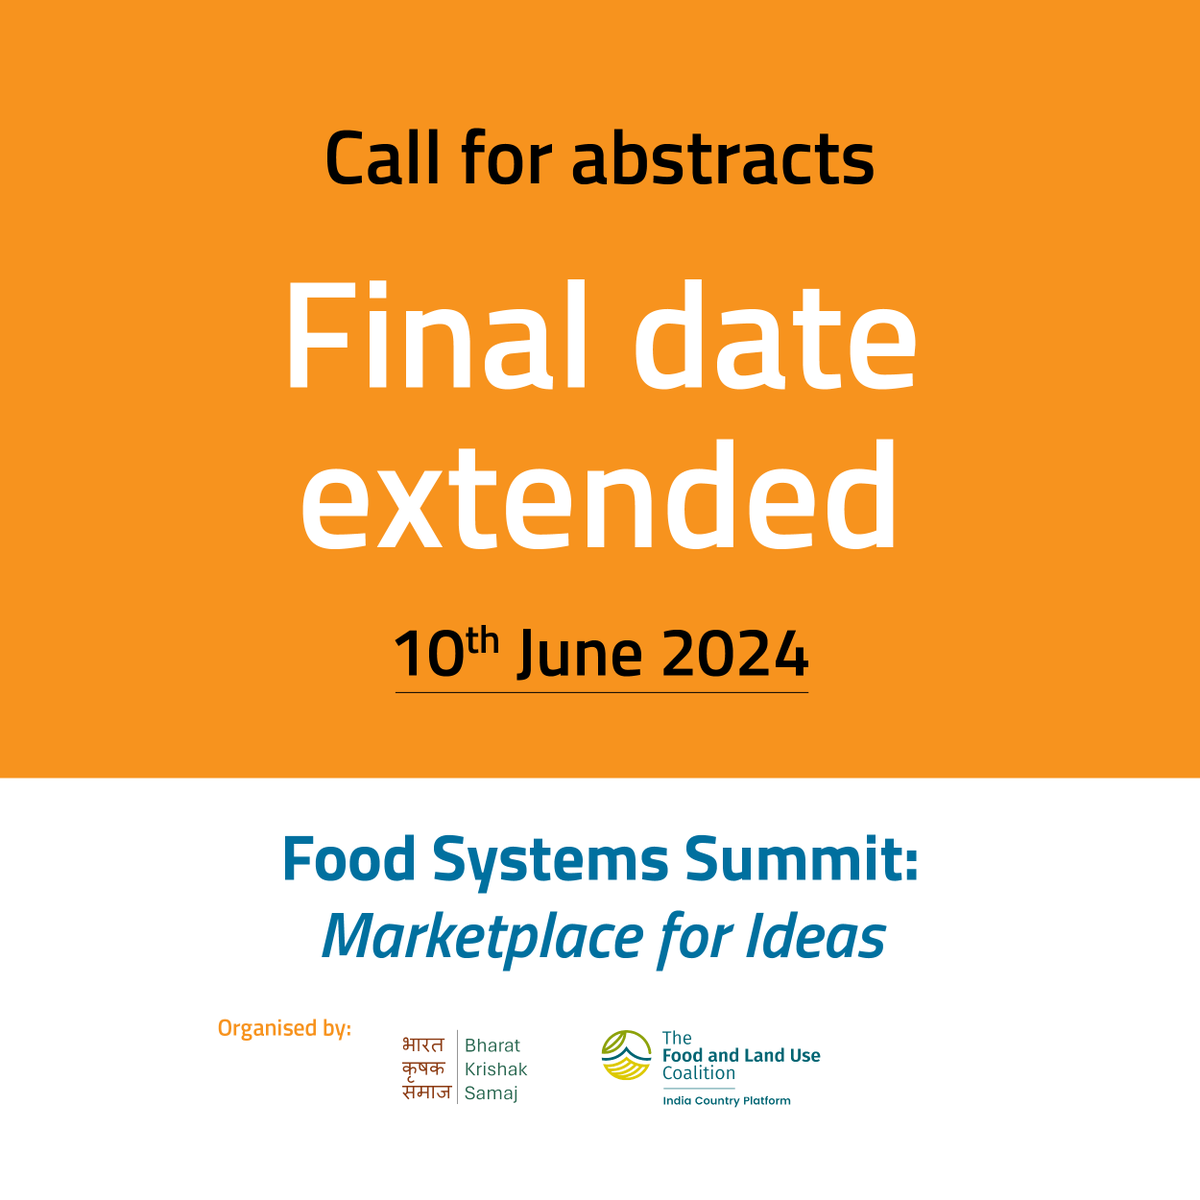 🔴 We’re extending the last date for submitting #abstracts to the #FoodSystems Summit 2024! Send in your abstracts before 🗓10th June here: 👉bit.ly/FSH_Form Details: 👉bit.ly/FSH_Details #callforabstracts